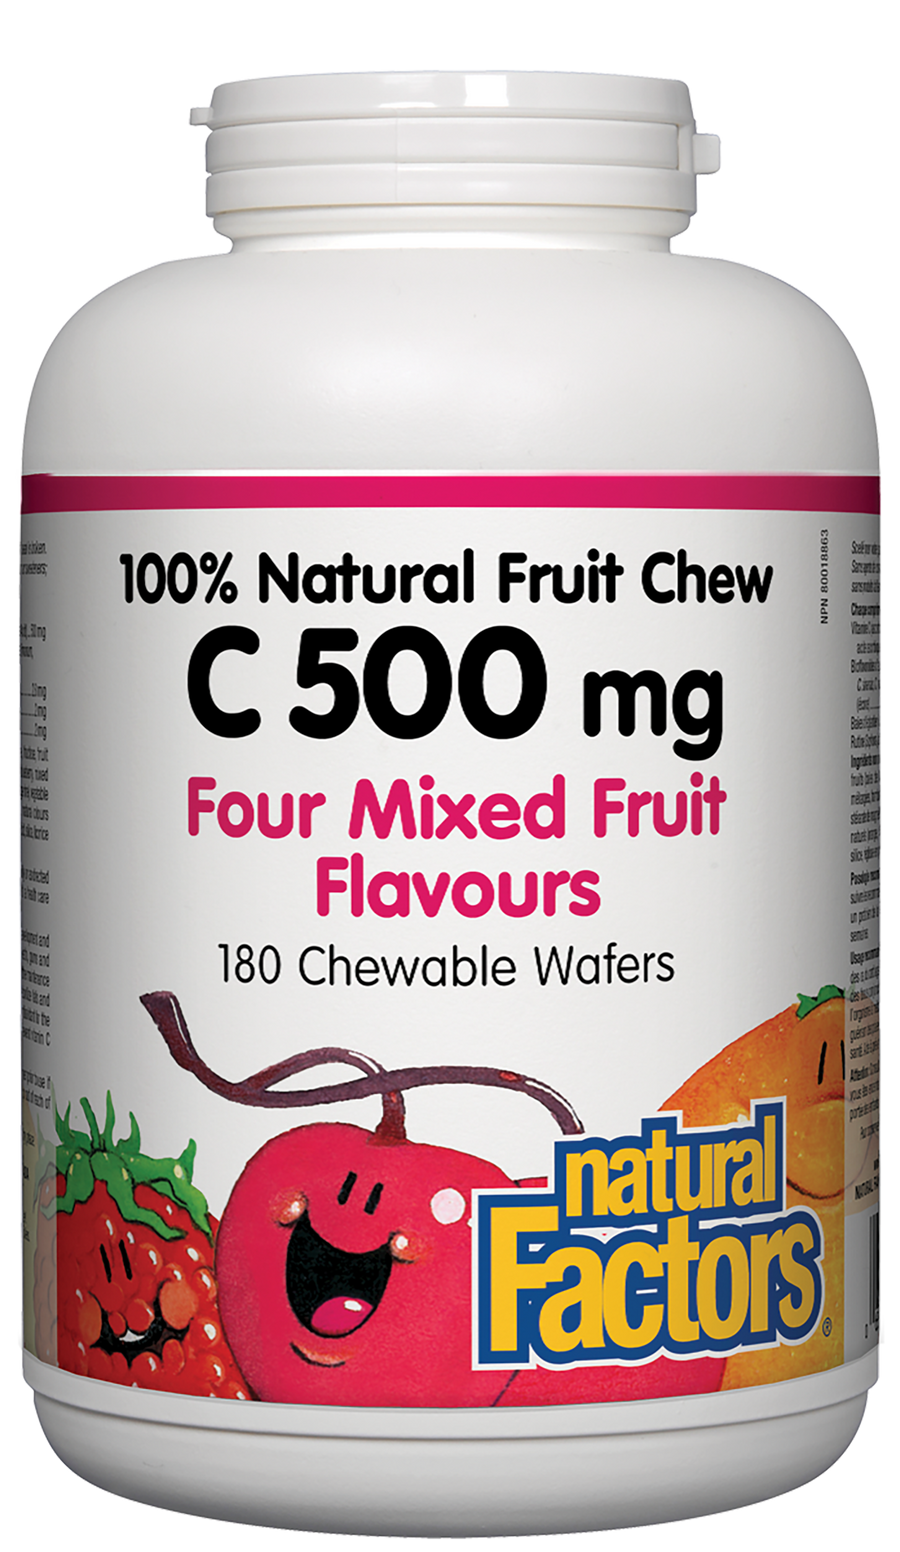 Natural Factors C 500 mg 100% Natural Fruit Chew, Four Mixed Fruit Flavours 180 Chewable Wafers